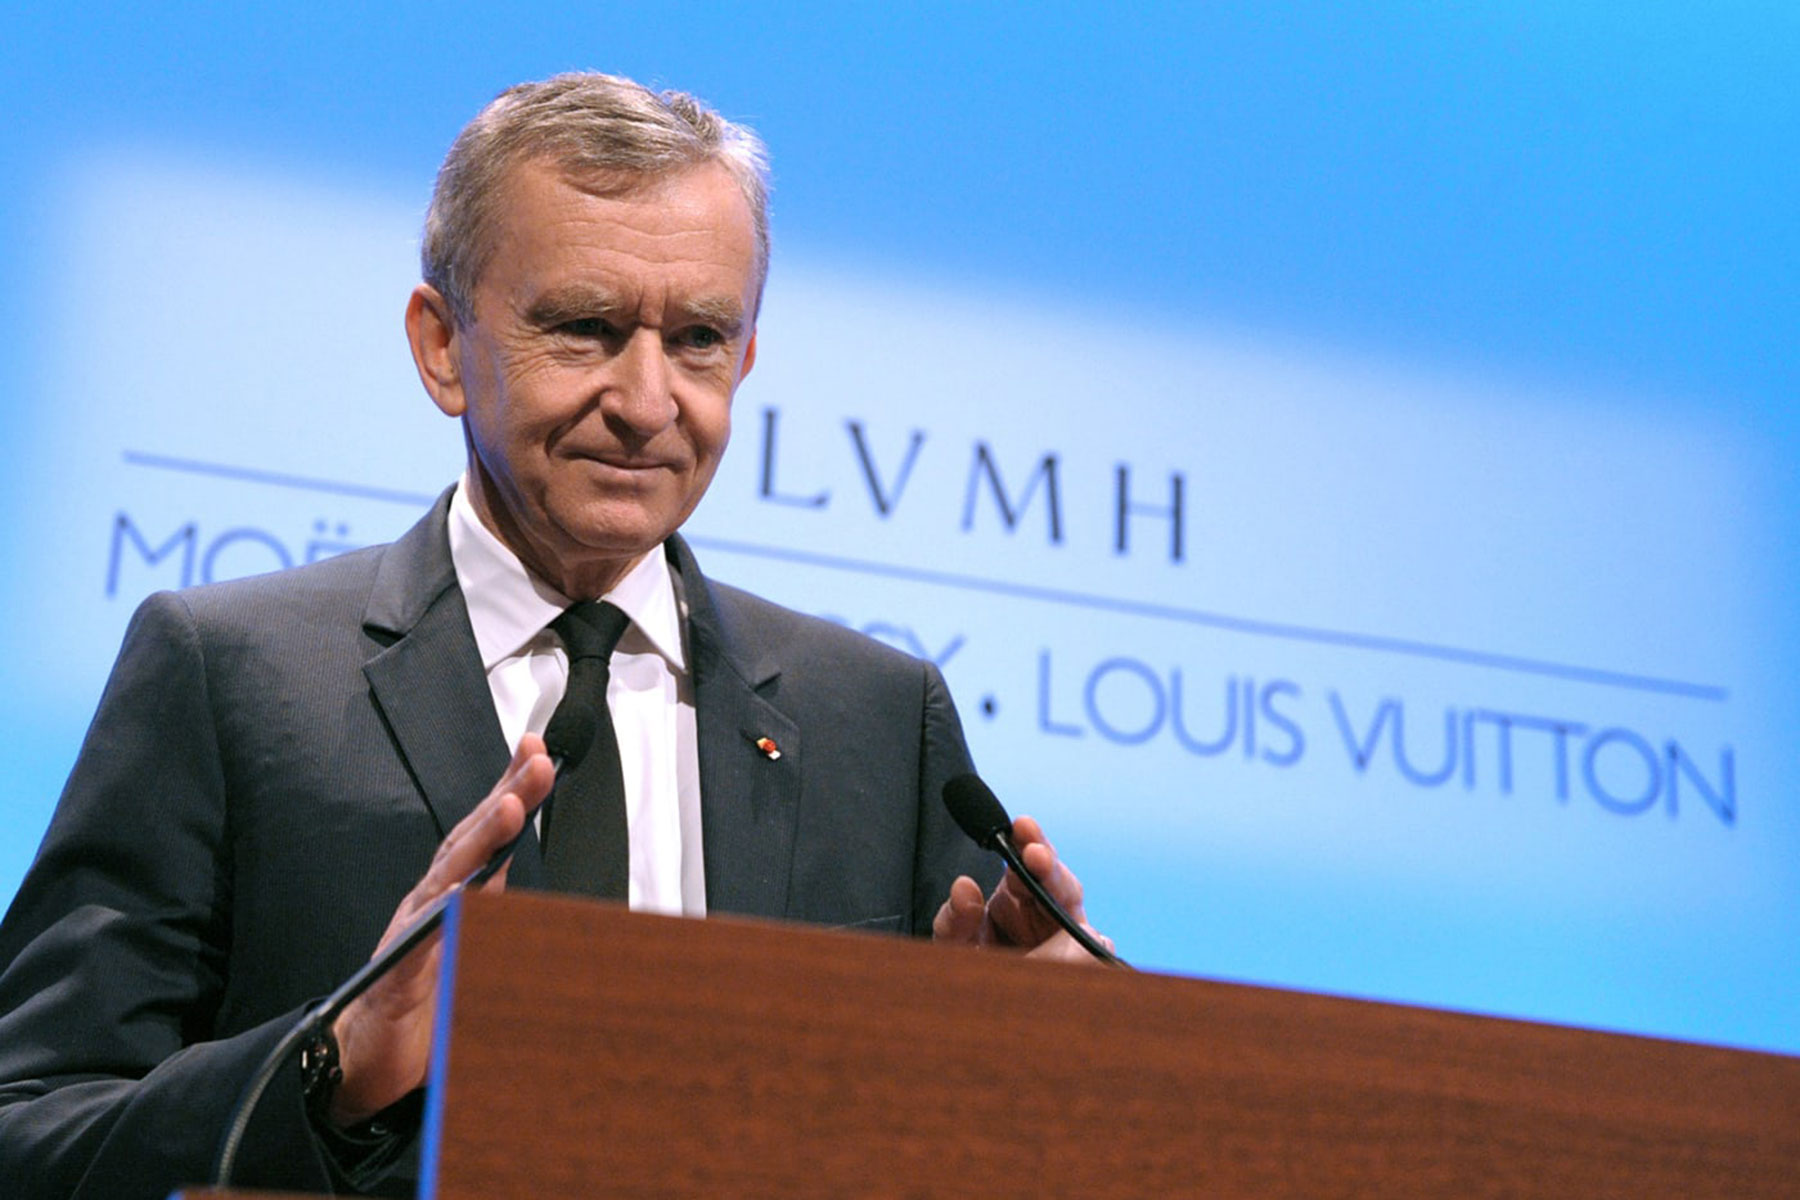 How one franc turned LVMH into the world's largest luxury group